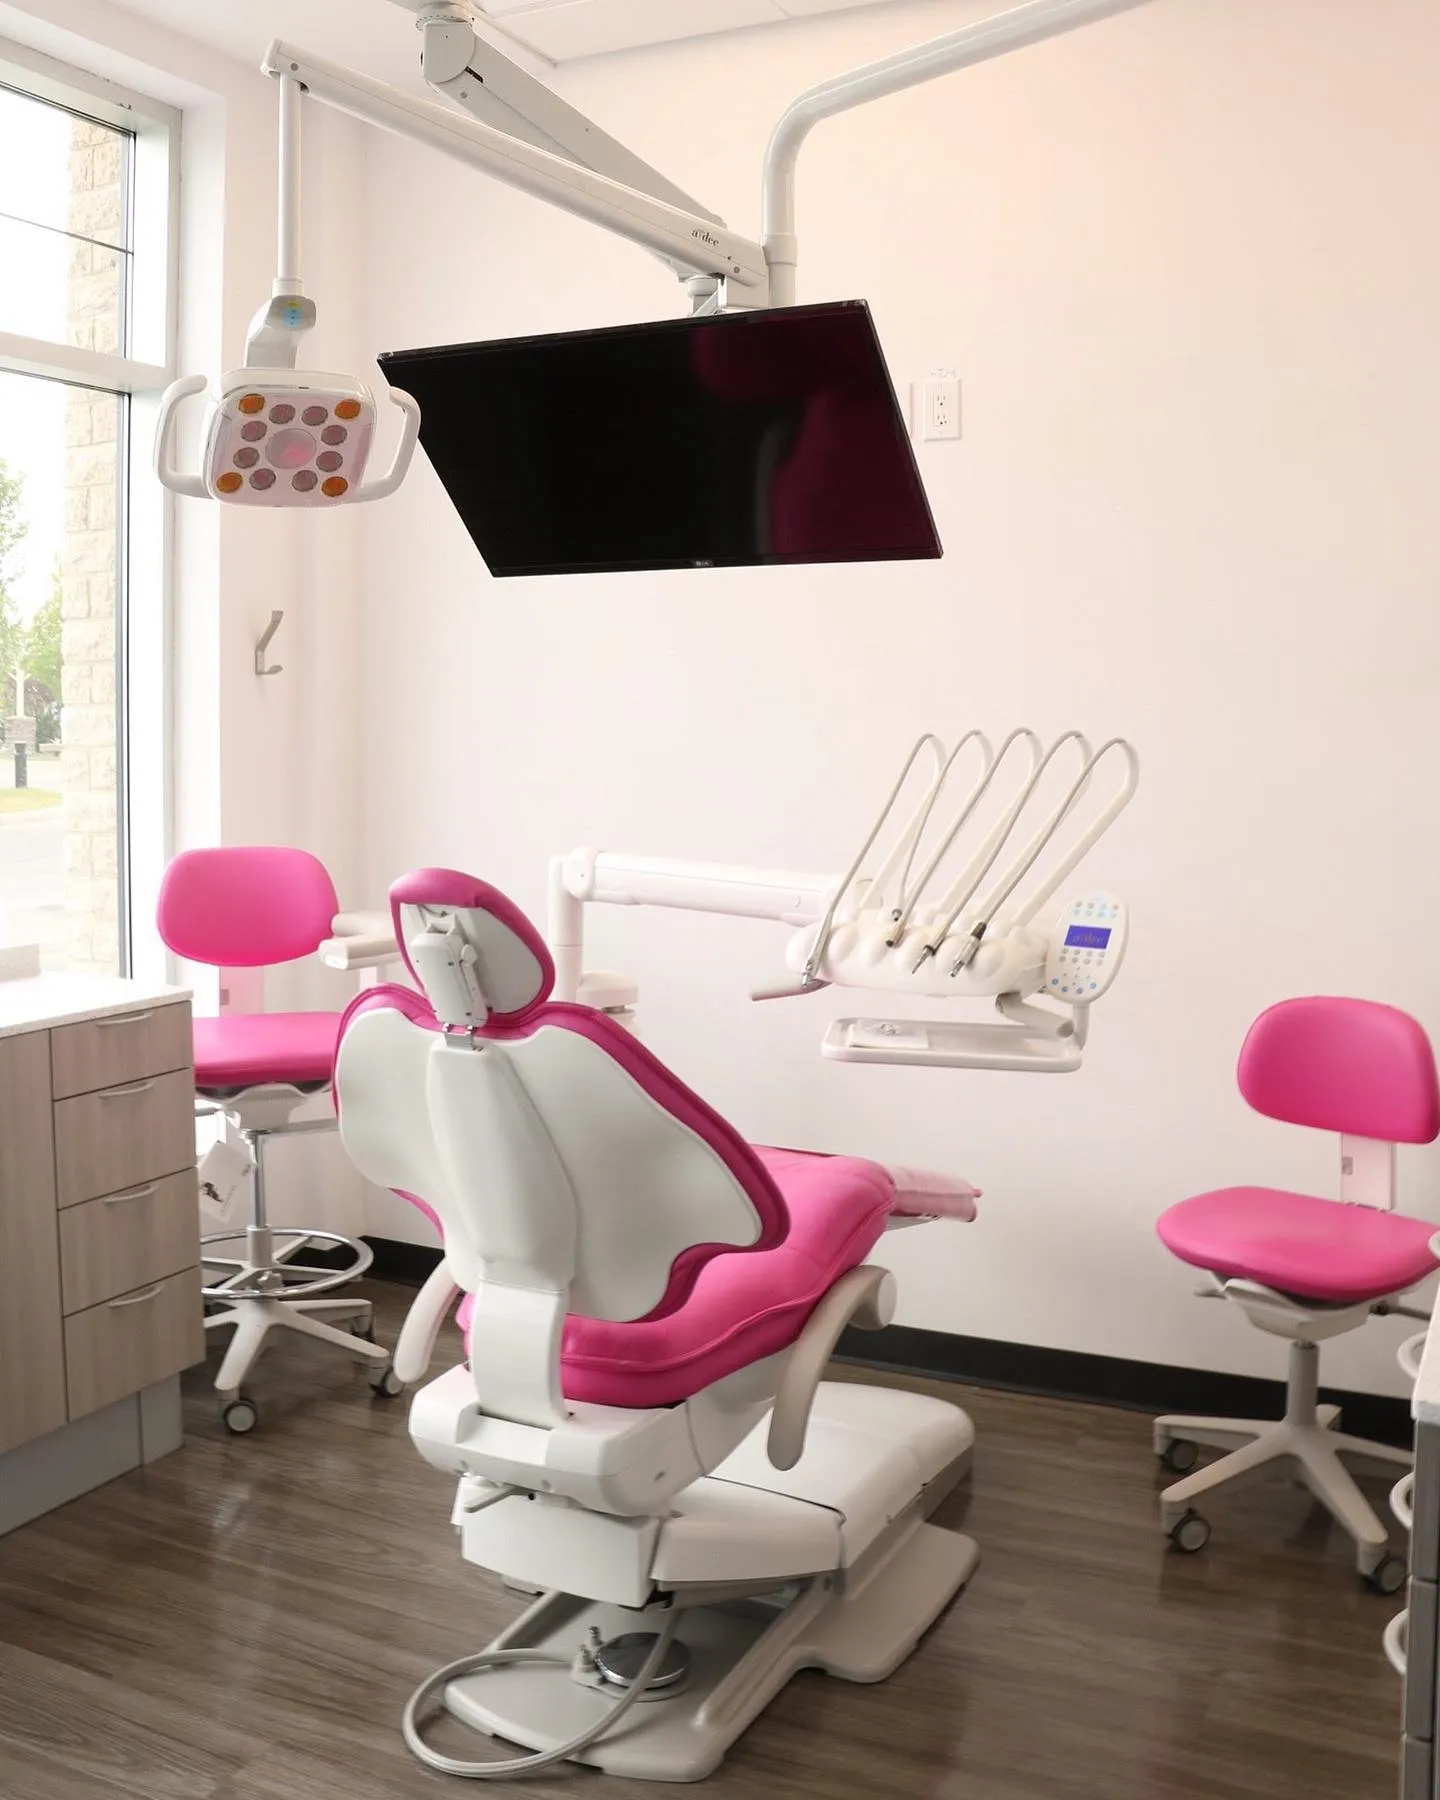 Root Canal bridlewoo dental clinic